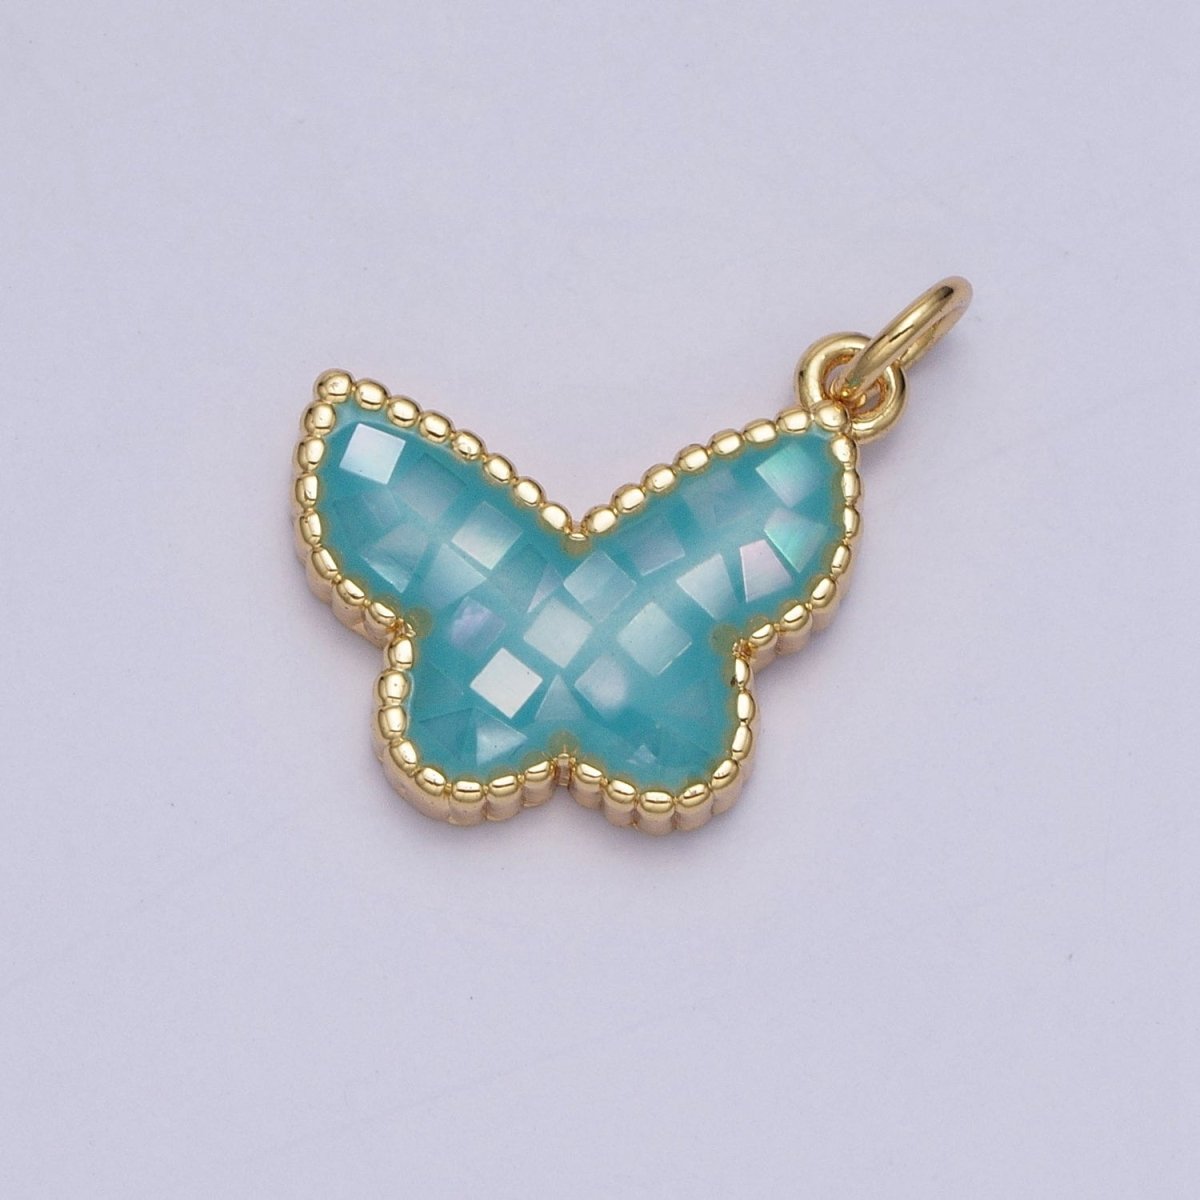 Blue, White, Pink, Purple, Green, Light Blue Opal Mariposa Butterfly Gold Charm For Jewelry Making AG-036~AG-041 - DLUXCA